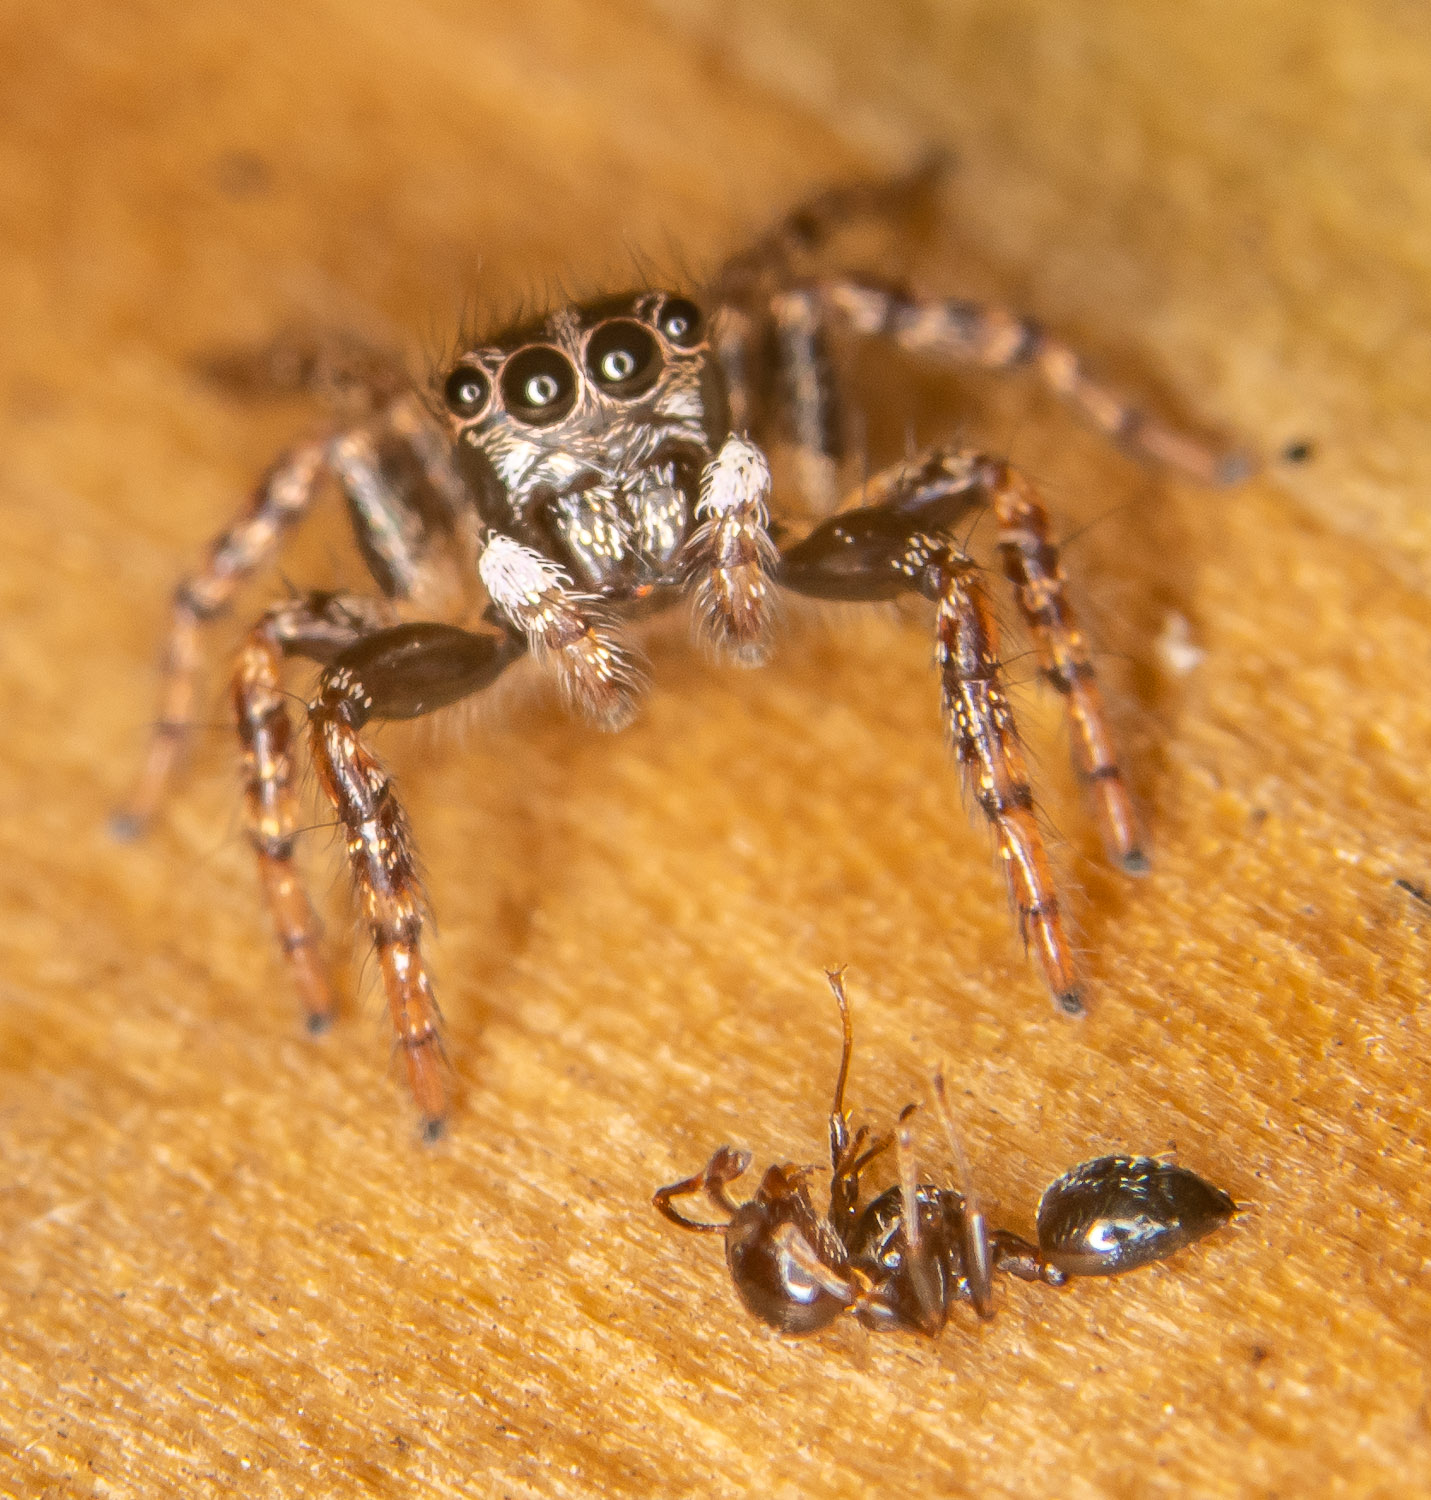 Jumping_spider_protecting_ant